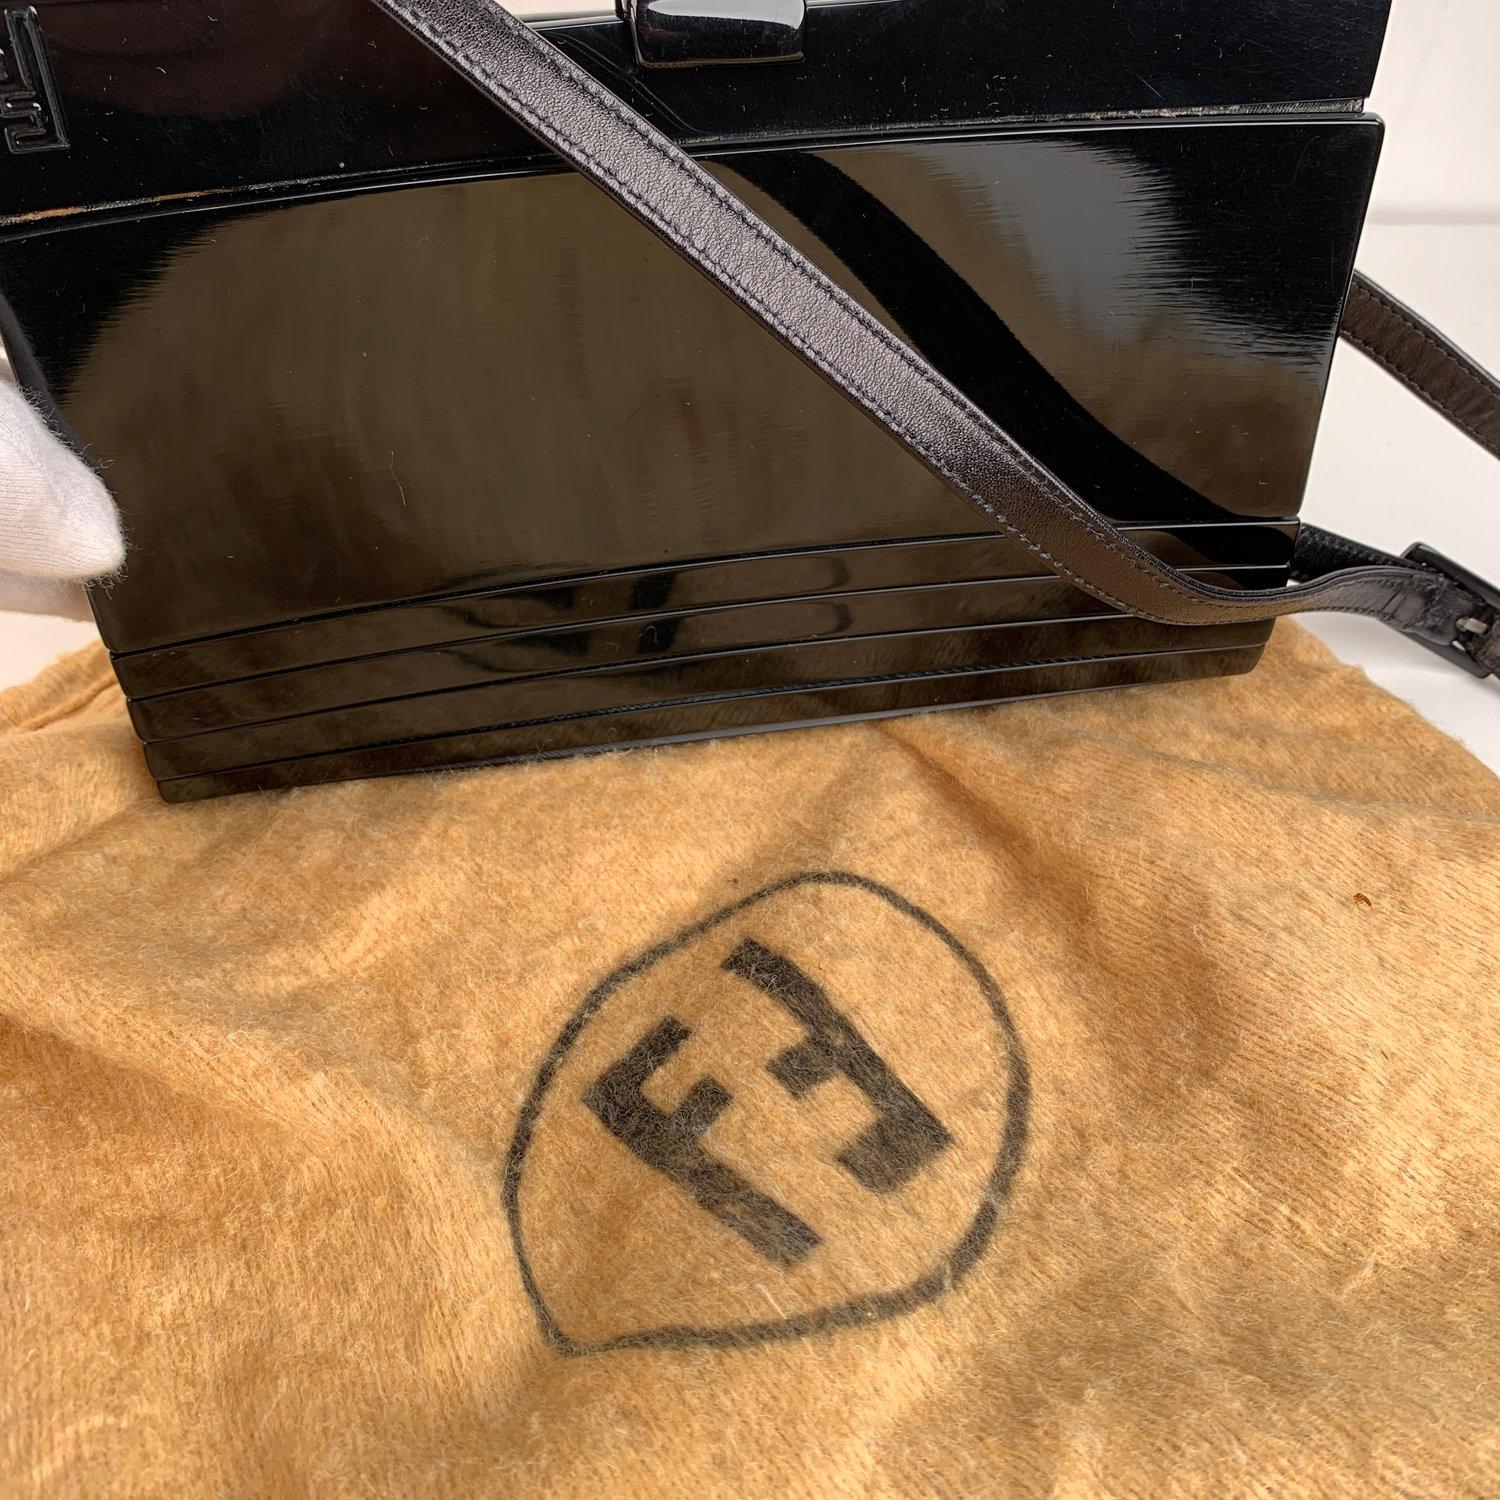 Beautiful and rare vintage Fendi convertible bag from the 60s/70s. The bag is crafted in balck lucite and leather. Clasp closure on top. FF - FENDI logo on the front. Removable leather shoulder strap (can be use as a shoulder bag or as a clutch